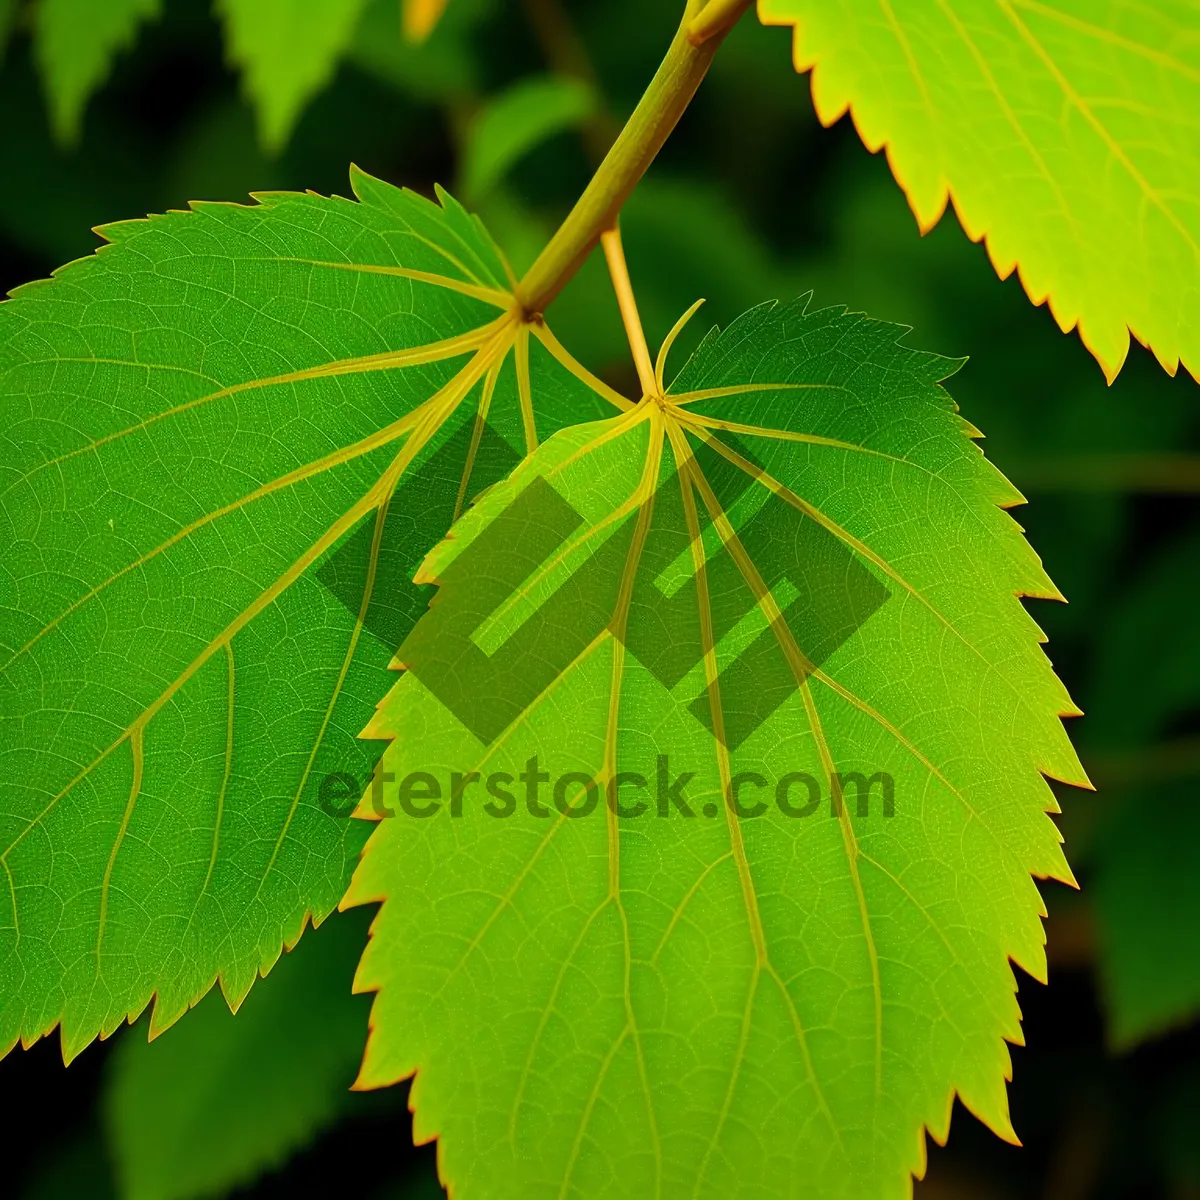 Picture of Birch and Maple Leaves in Lush Forest